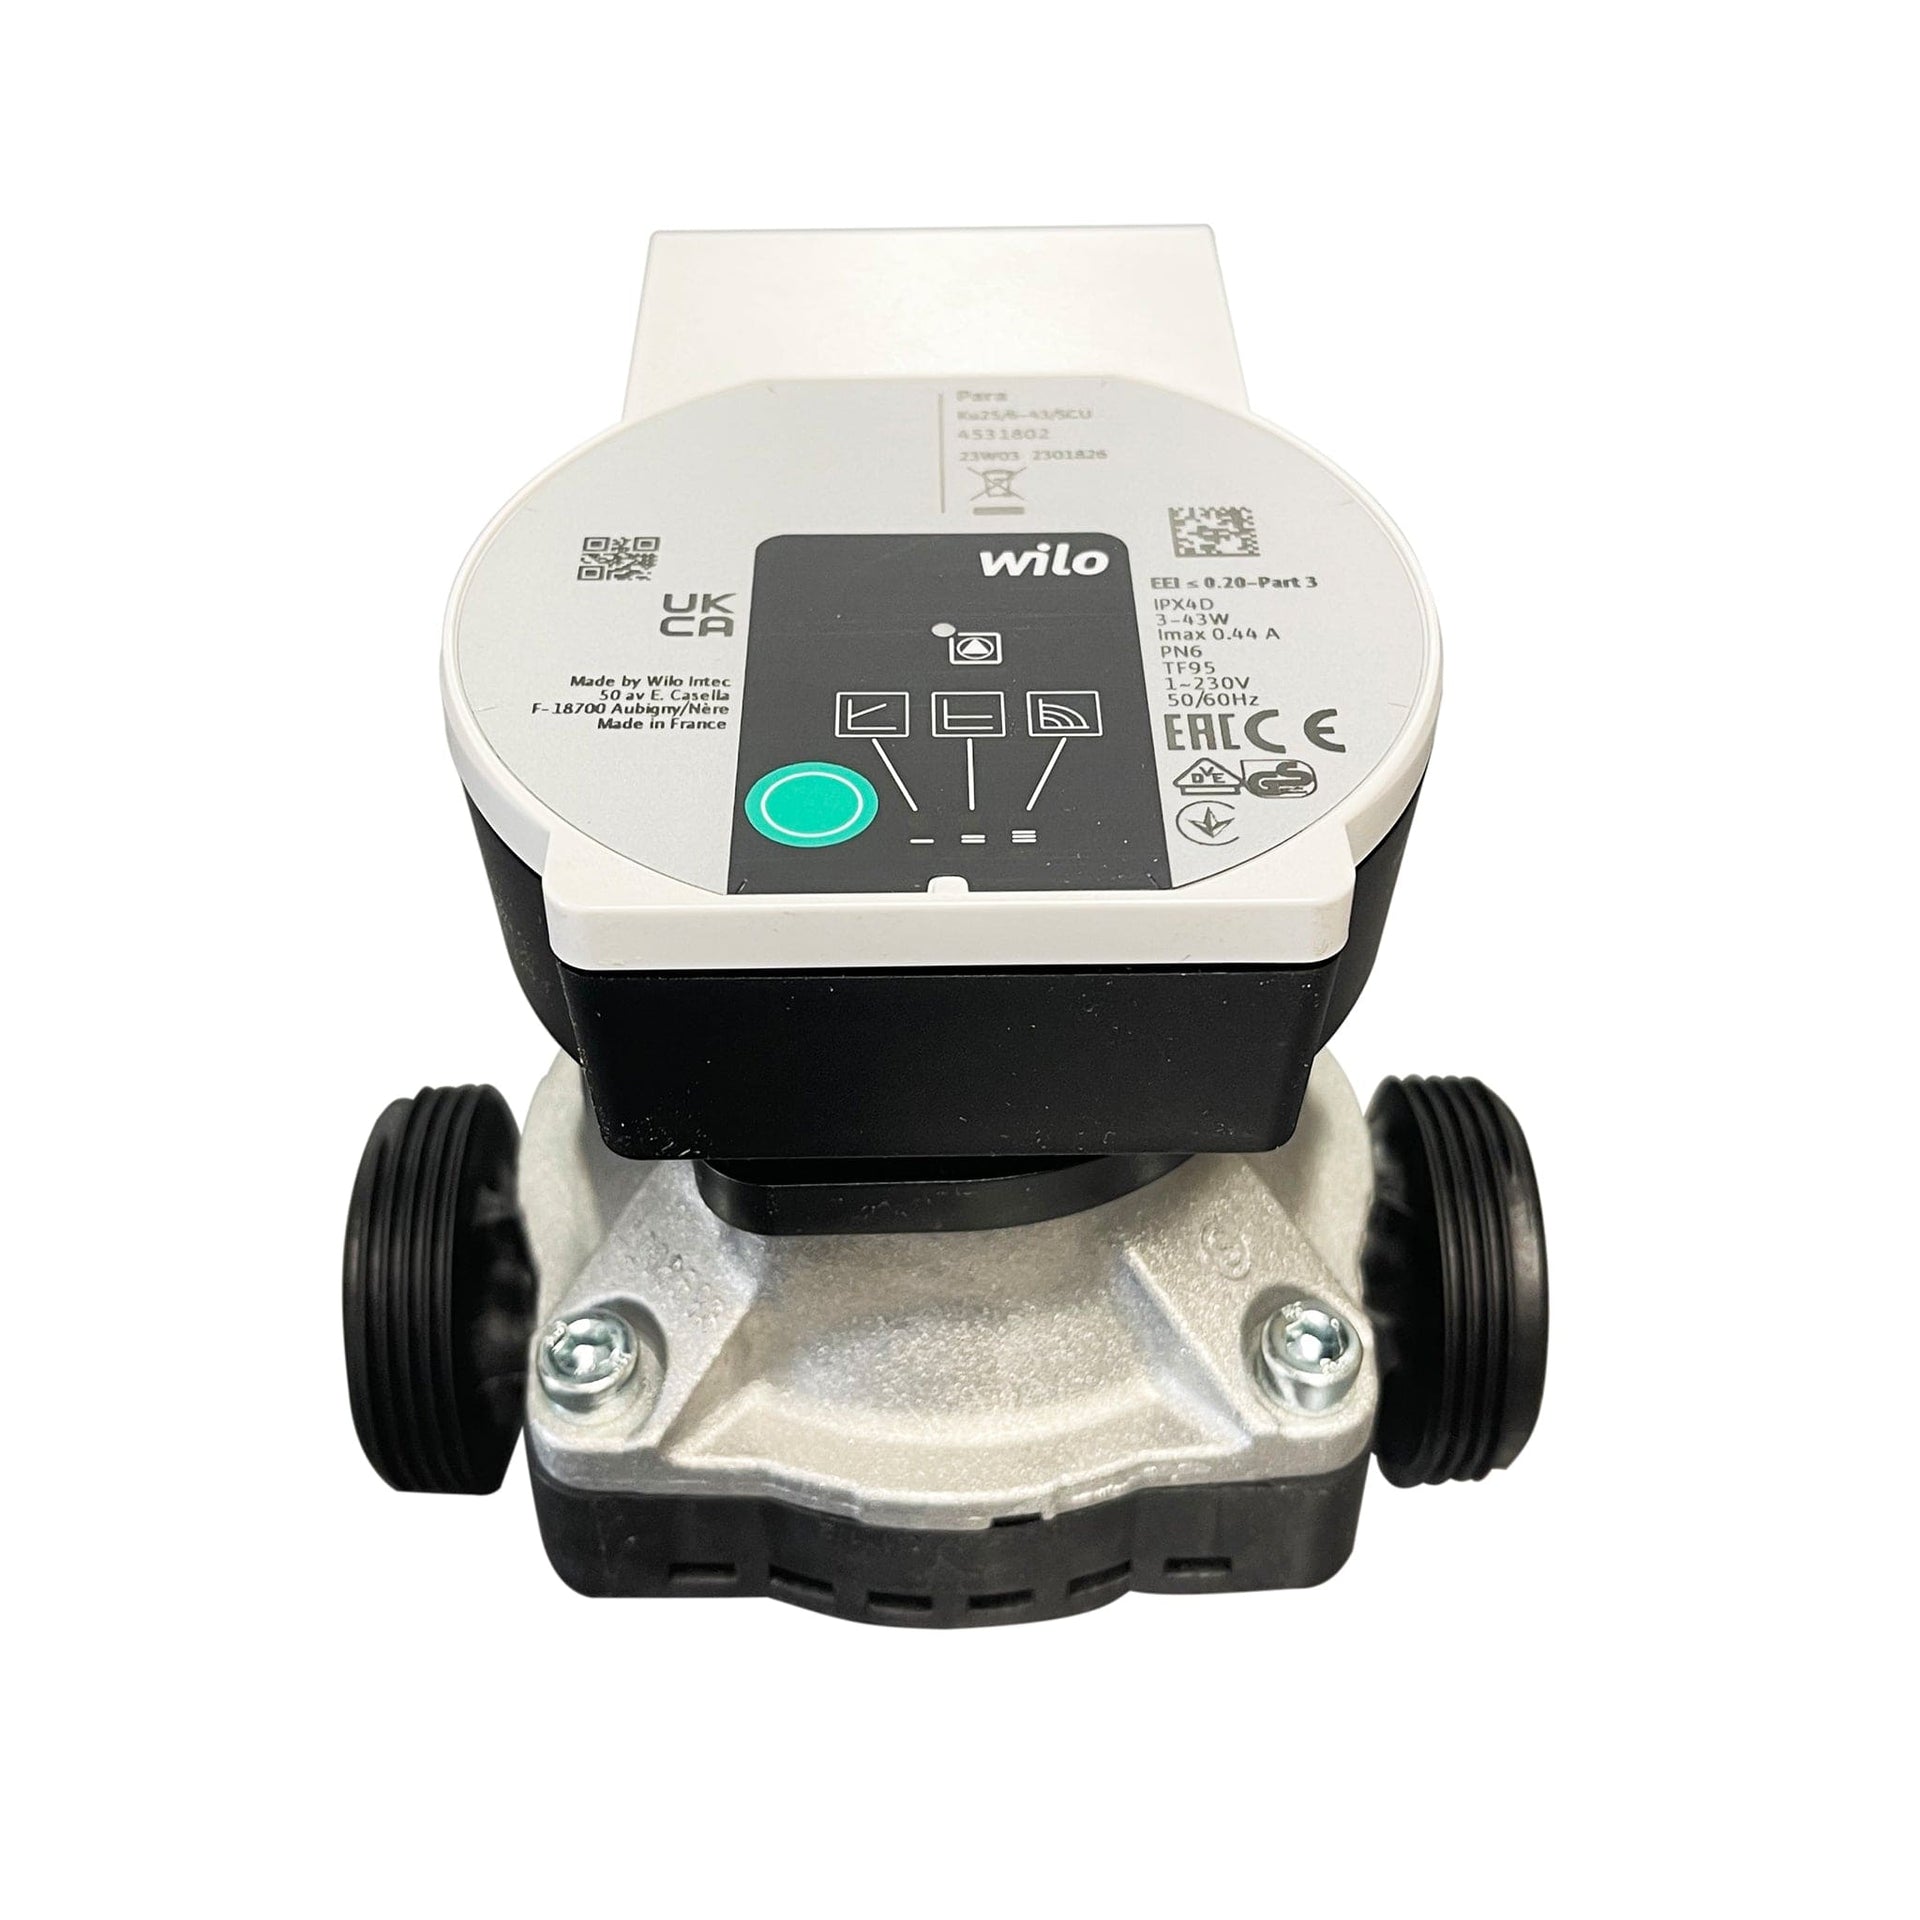 Wilo A Circulation Pump 6 Metre Head Inc Cable | WILO01 – The UFH Group